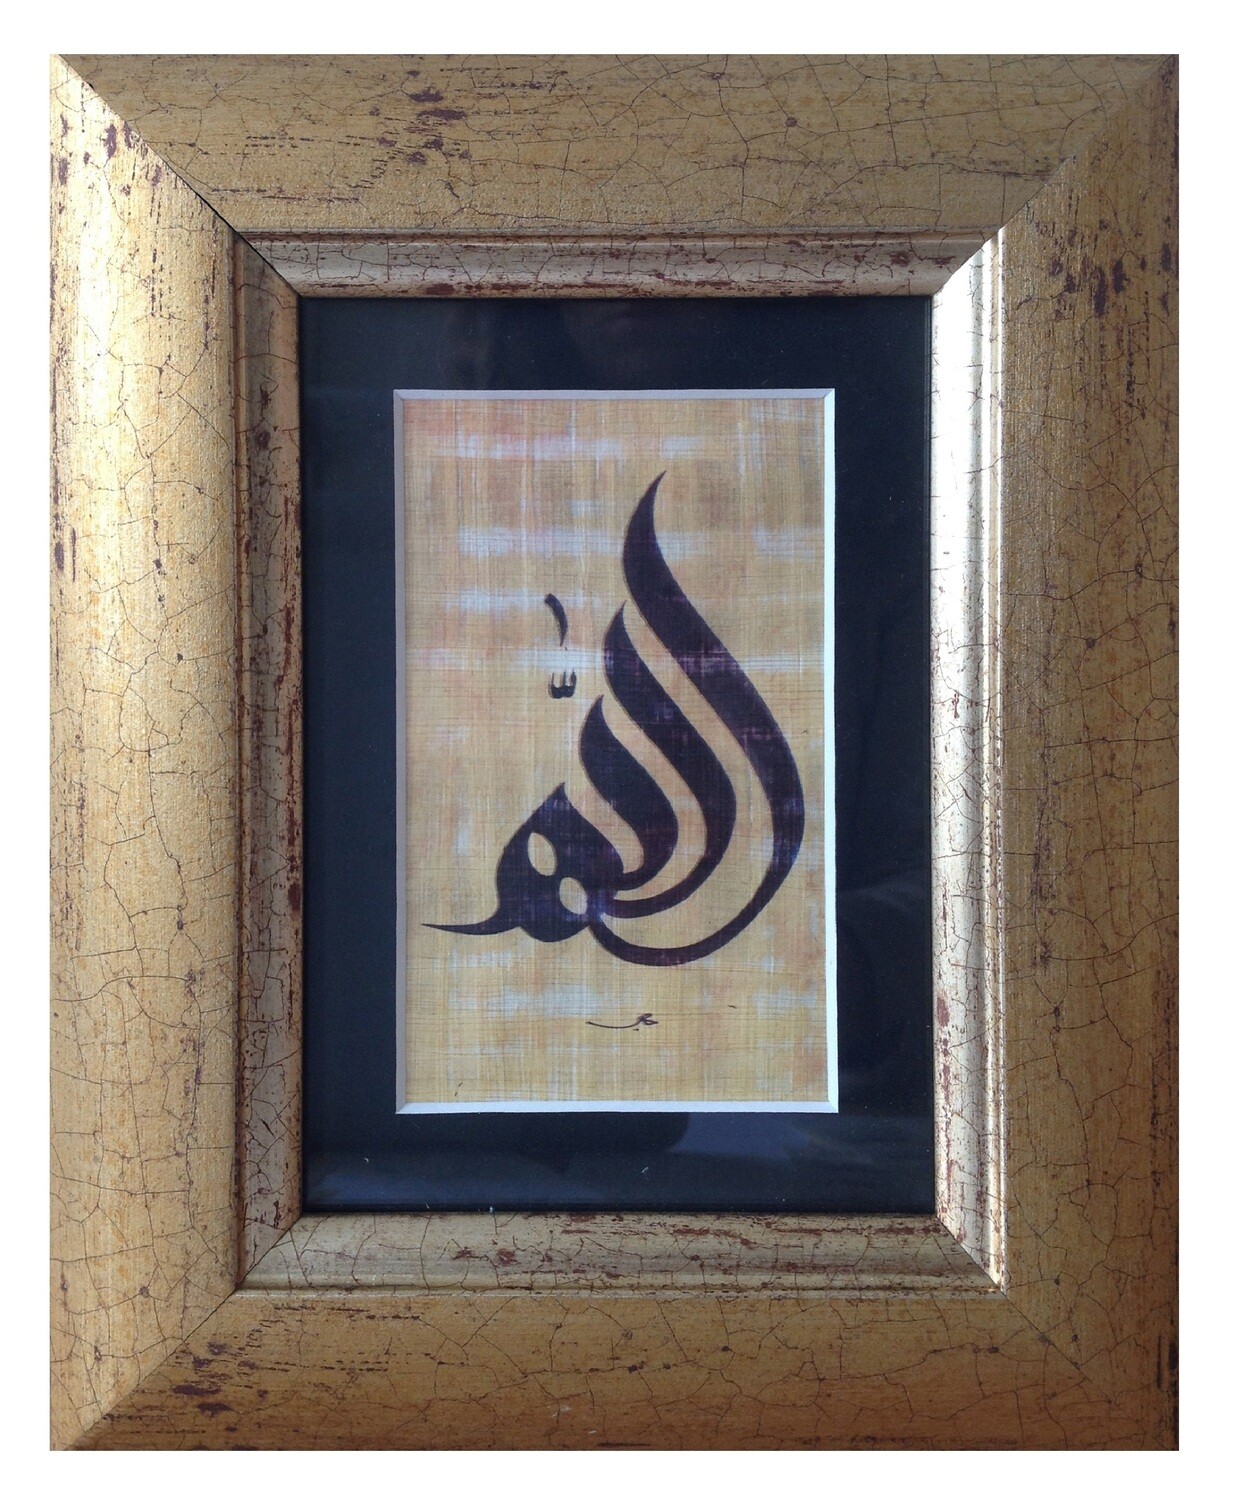 Allah Stylistic Calligraphy Design On Papyrus in Gold Frame